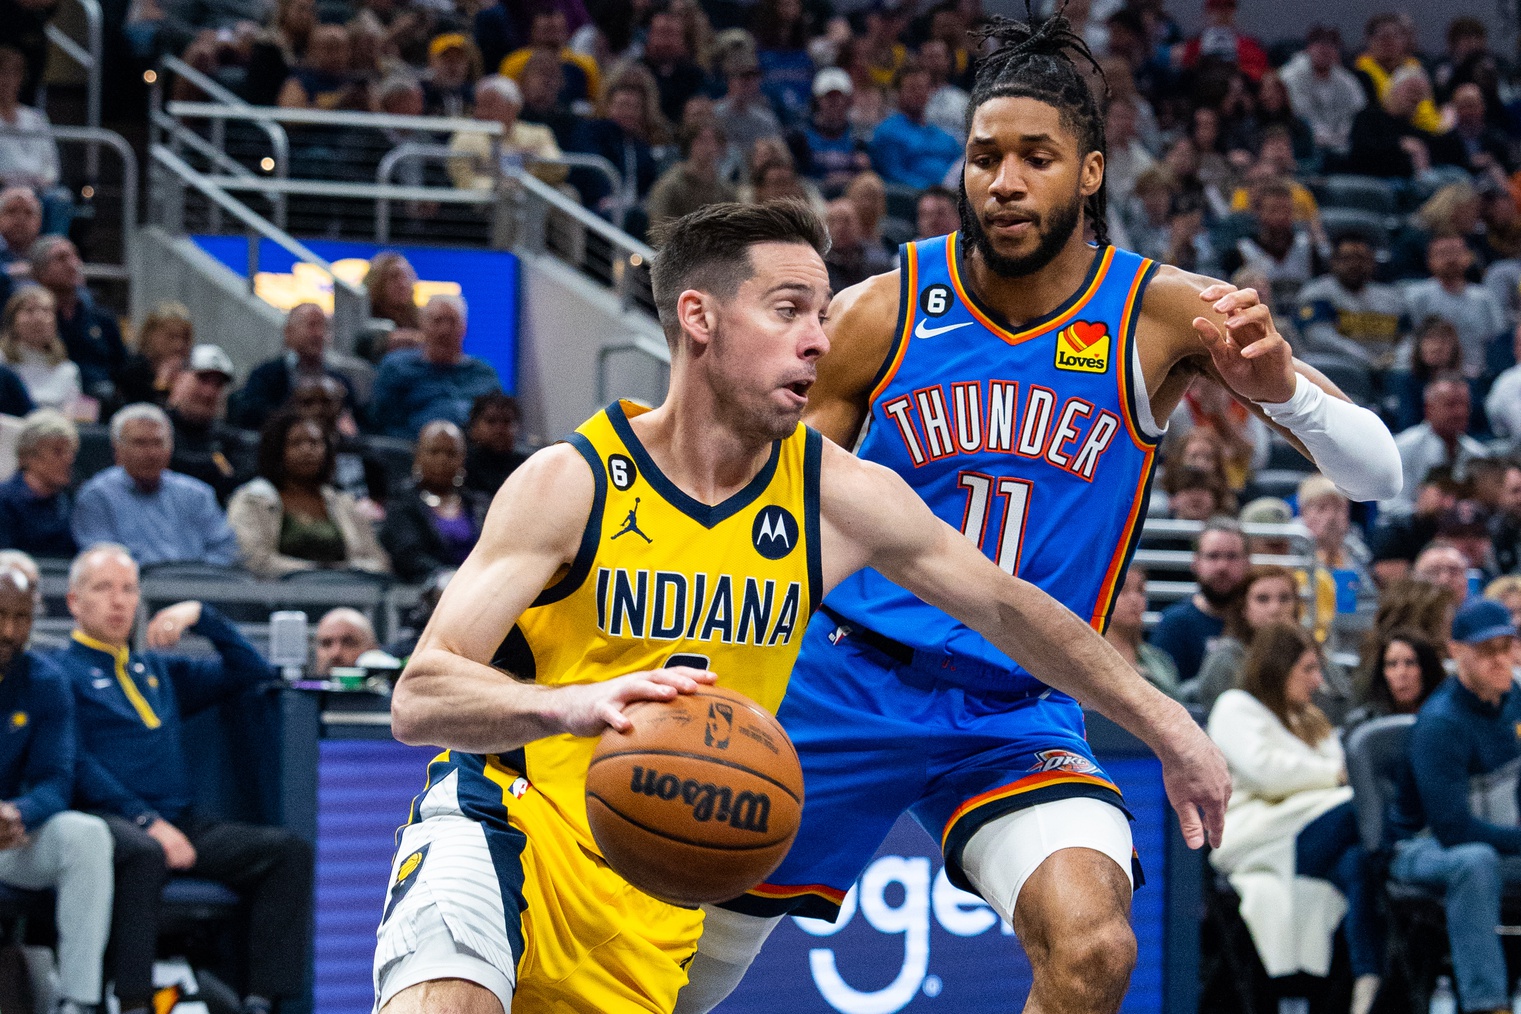 Mar 31, 2023; Indianapolis, Indiana, USA; Indiana Pacers guard T.J. McConnell (9) dribbles the ball while Oklahoma City Thunder guard Isaiah Joe (11) defends in the first quarter at Gainbridge Fieldhouse. Mandatory Credit: Trevor Ruszkowski-USA TODAY Sports